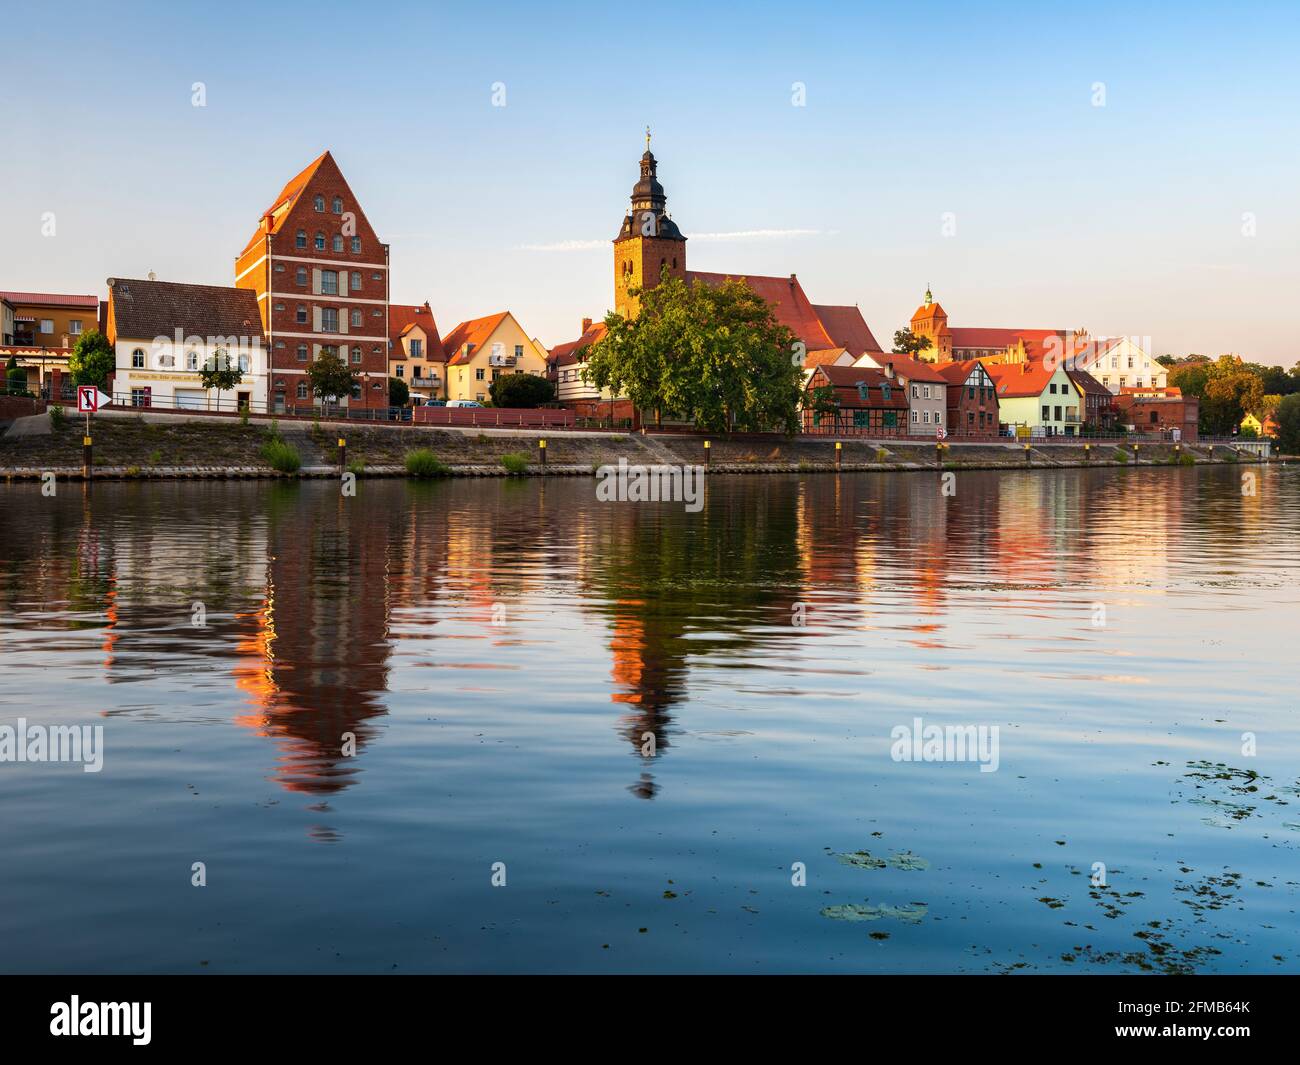 Havelberg with St. Marien Cathedral in the evening light, reflection in the Havel River, Hanseatic City of Havelberg, Saxony-Anhalt, Germany Stock Photo